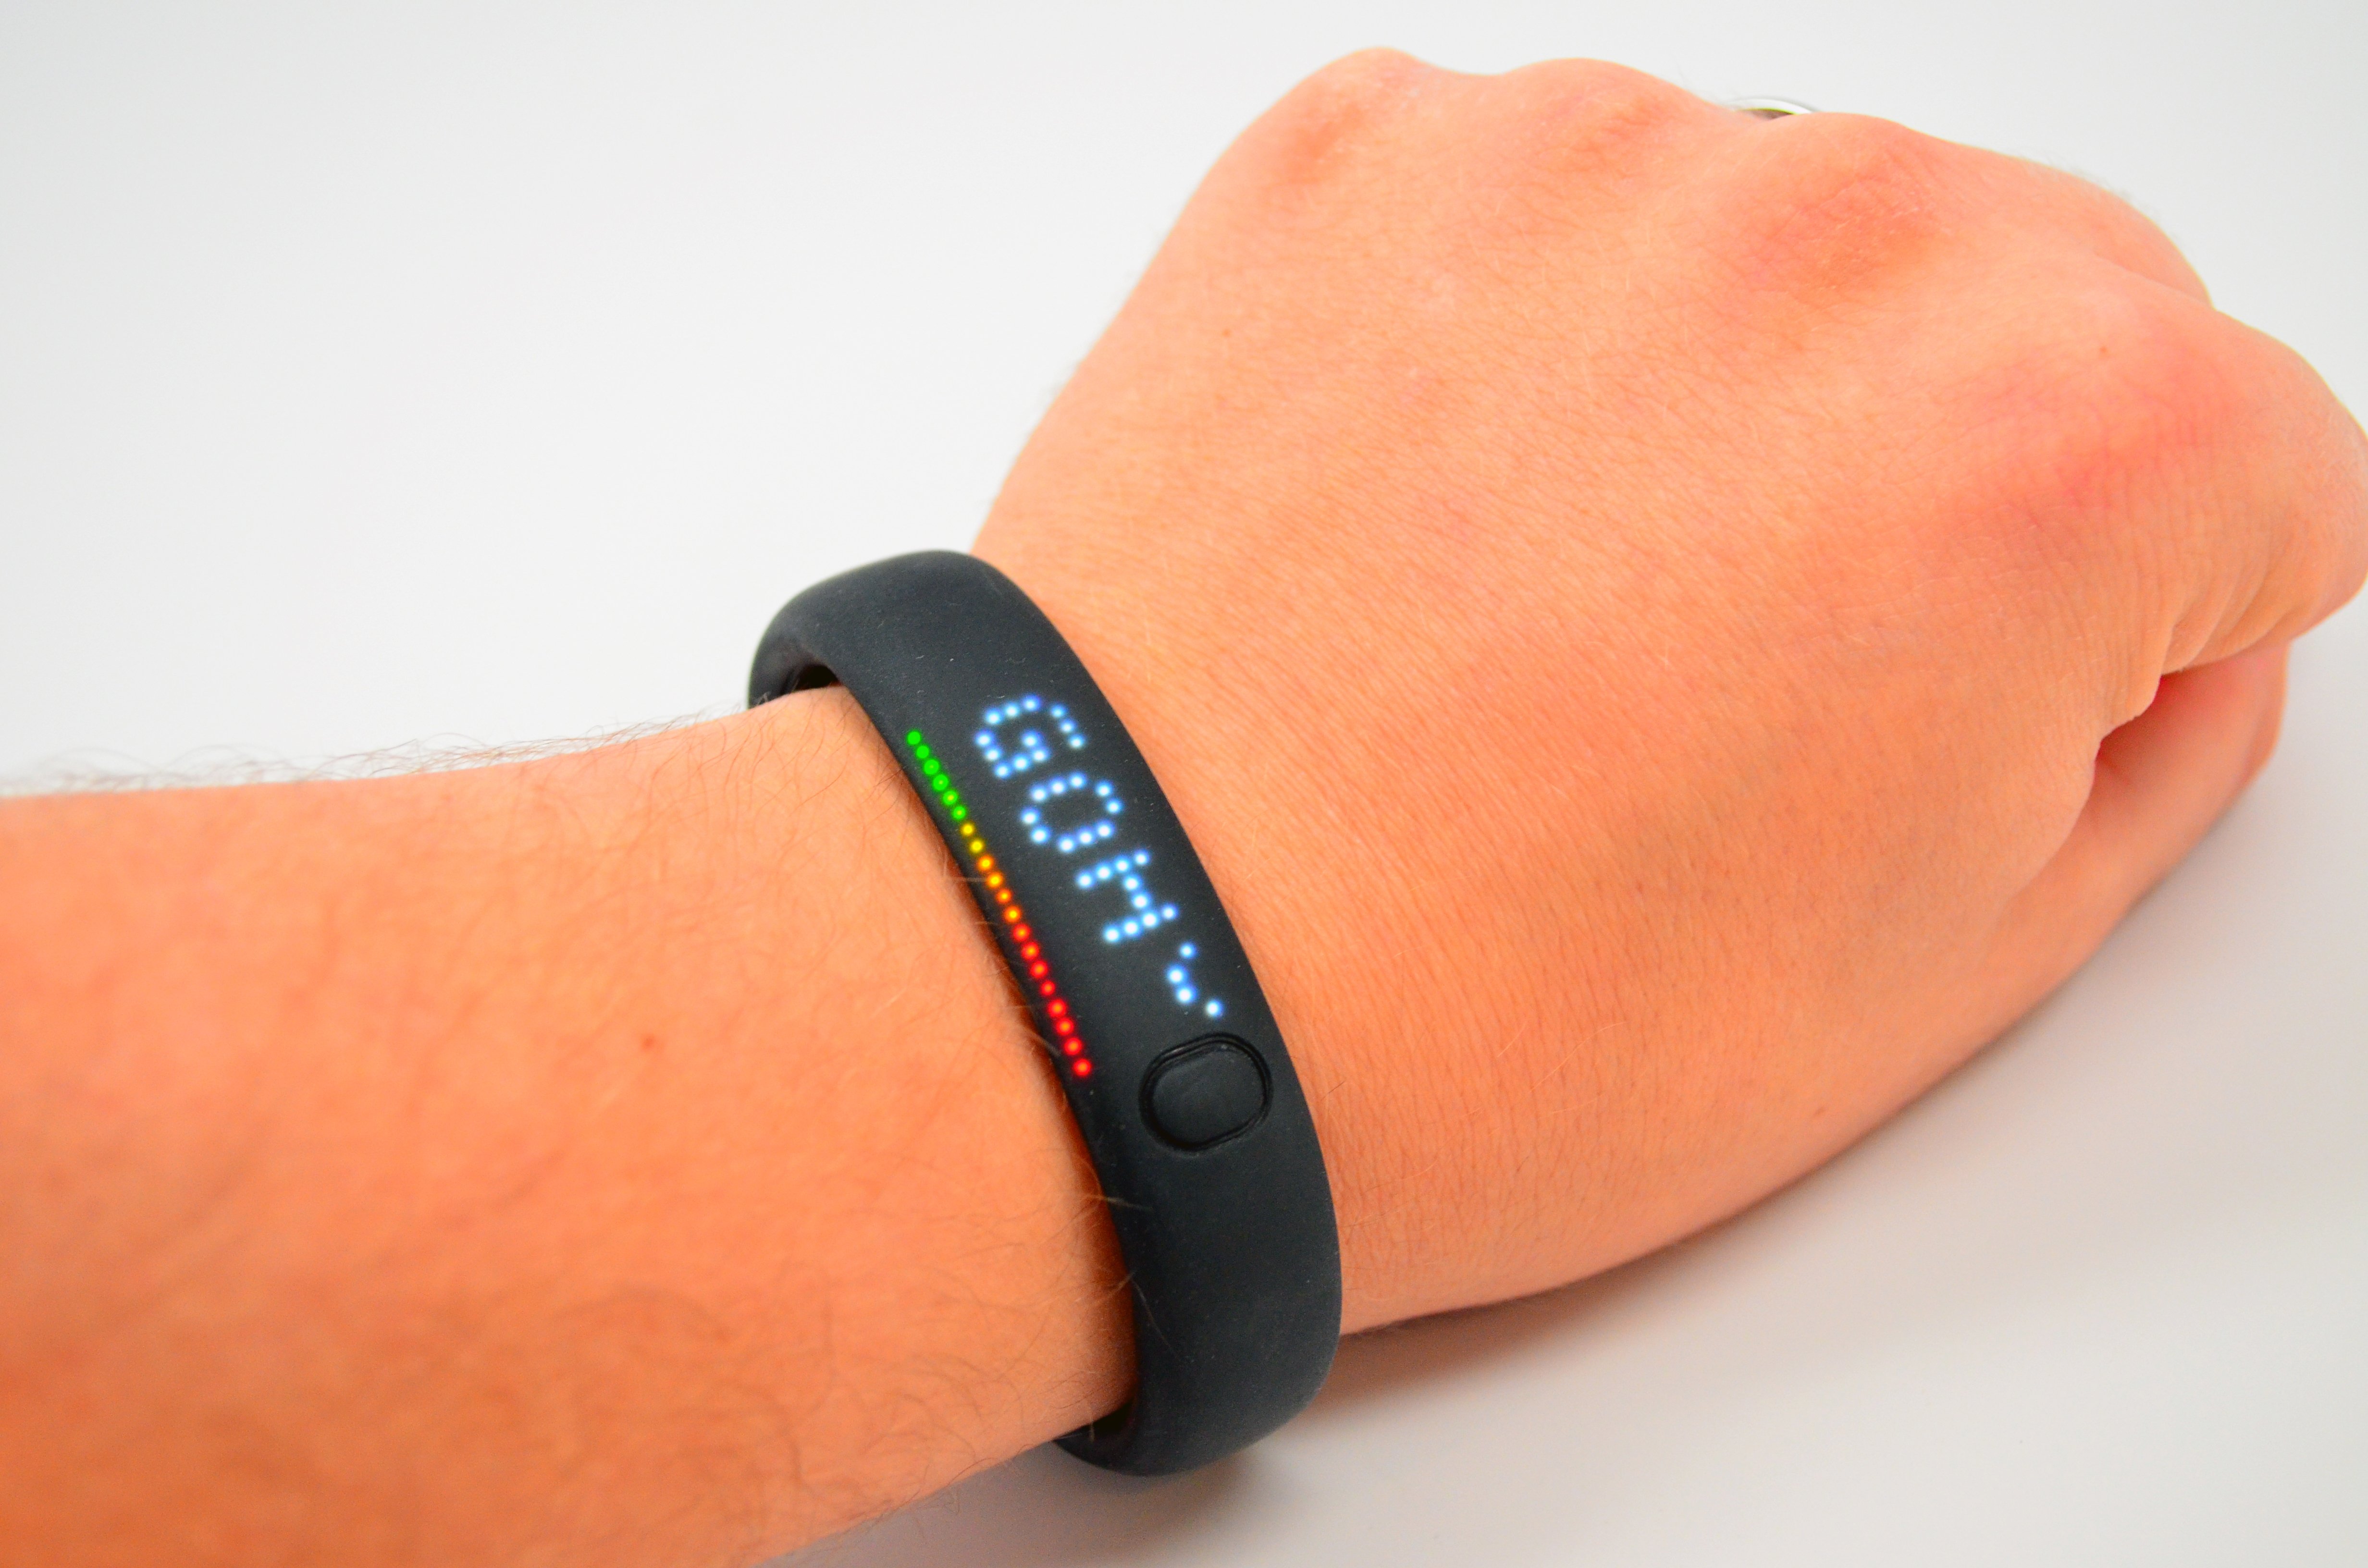 Oblicuo Privación Seguro Nike FuelBand 2: Heart Rate Monitor & Android Support Rumored